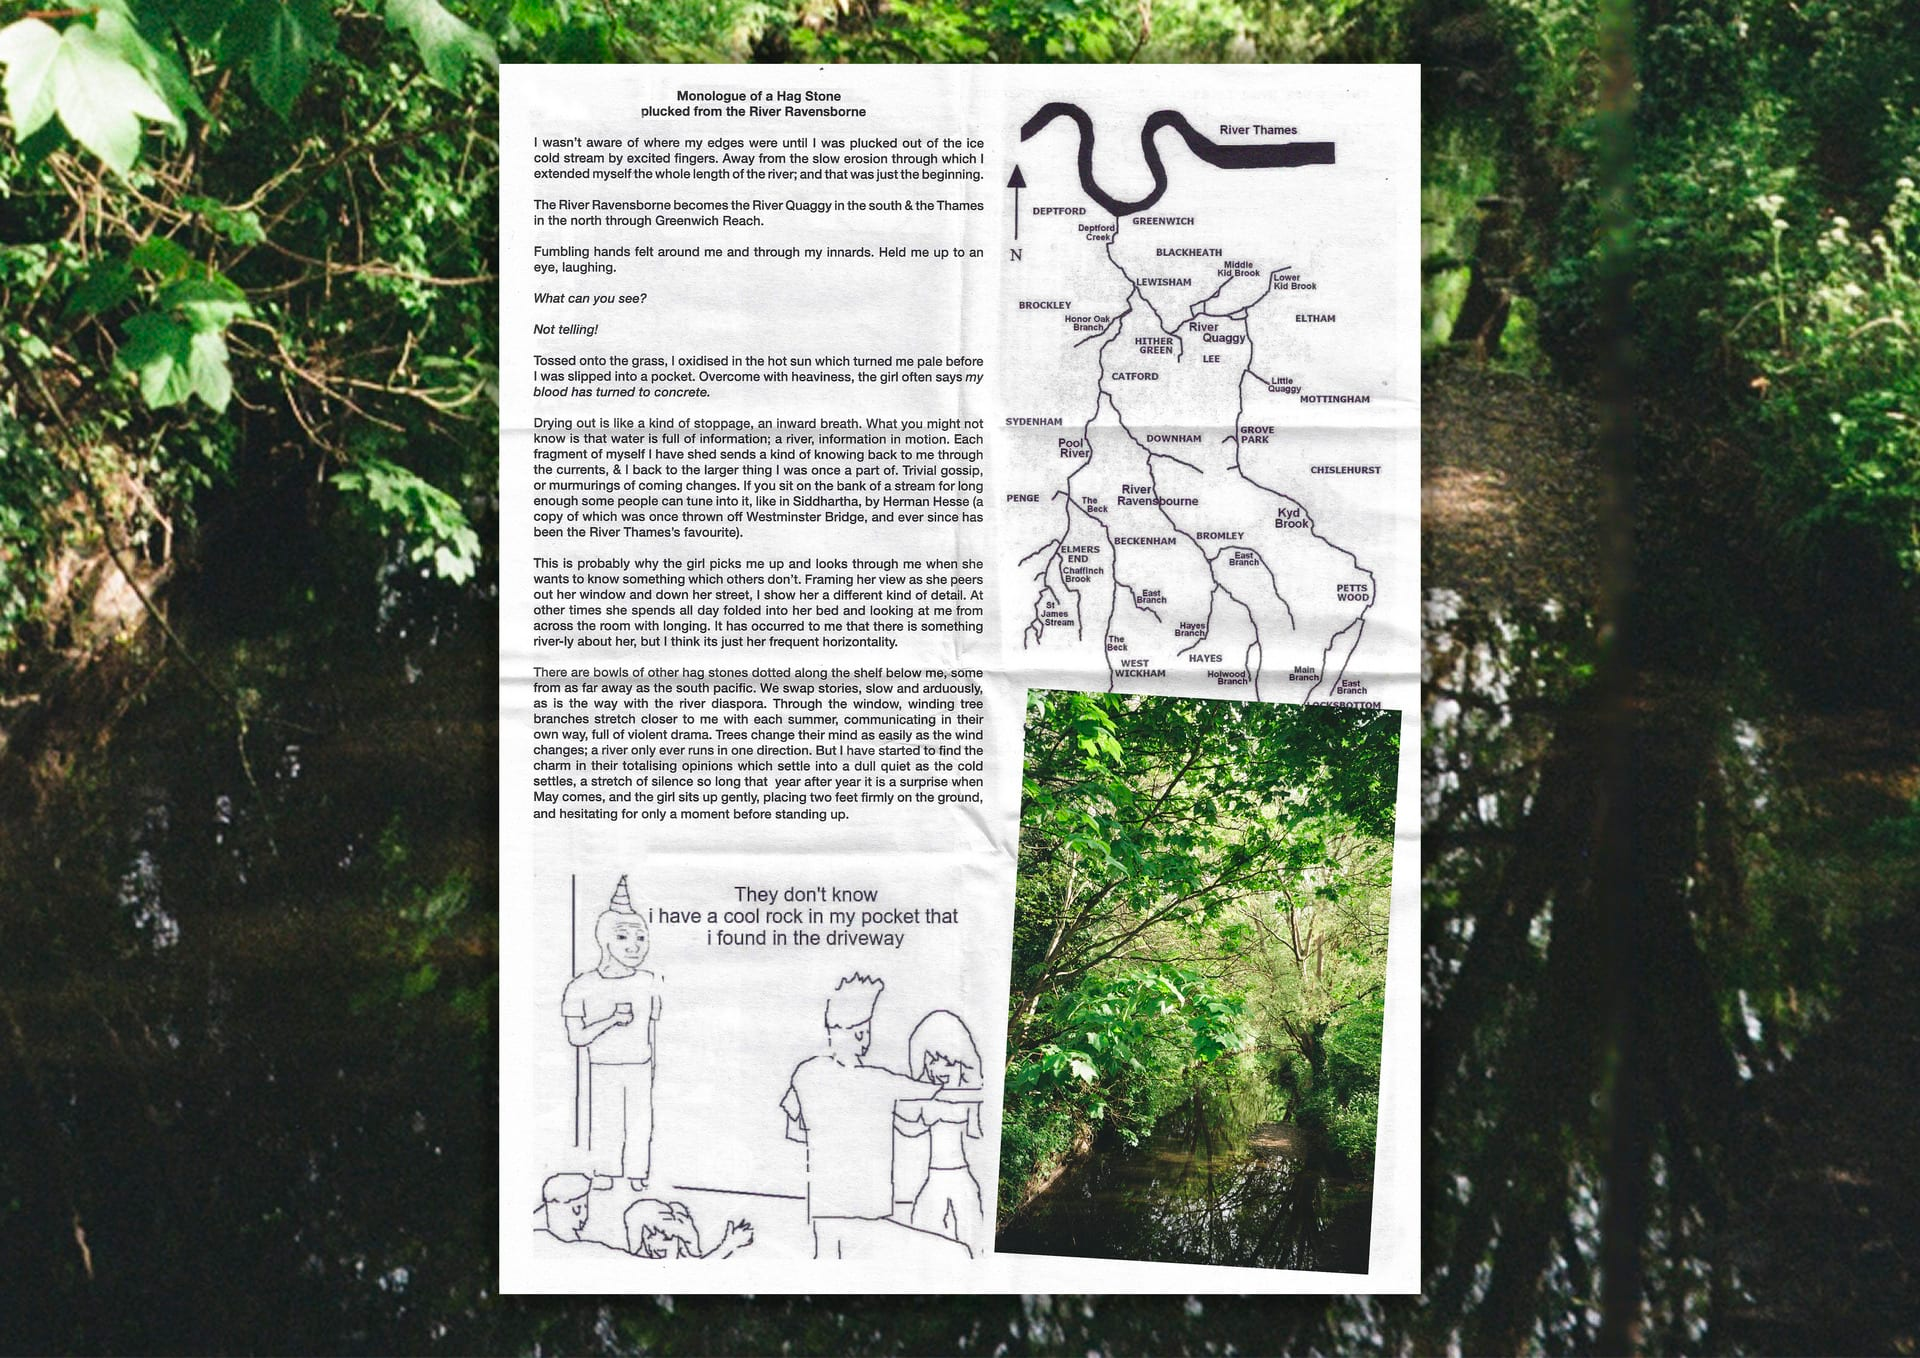 Image of a sheet of paper with fold marks, with text, a cartoon drawing, a map and photograph of a river or stream beneath trees,  on top of a background of the same photograph.